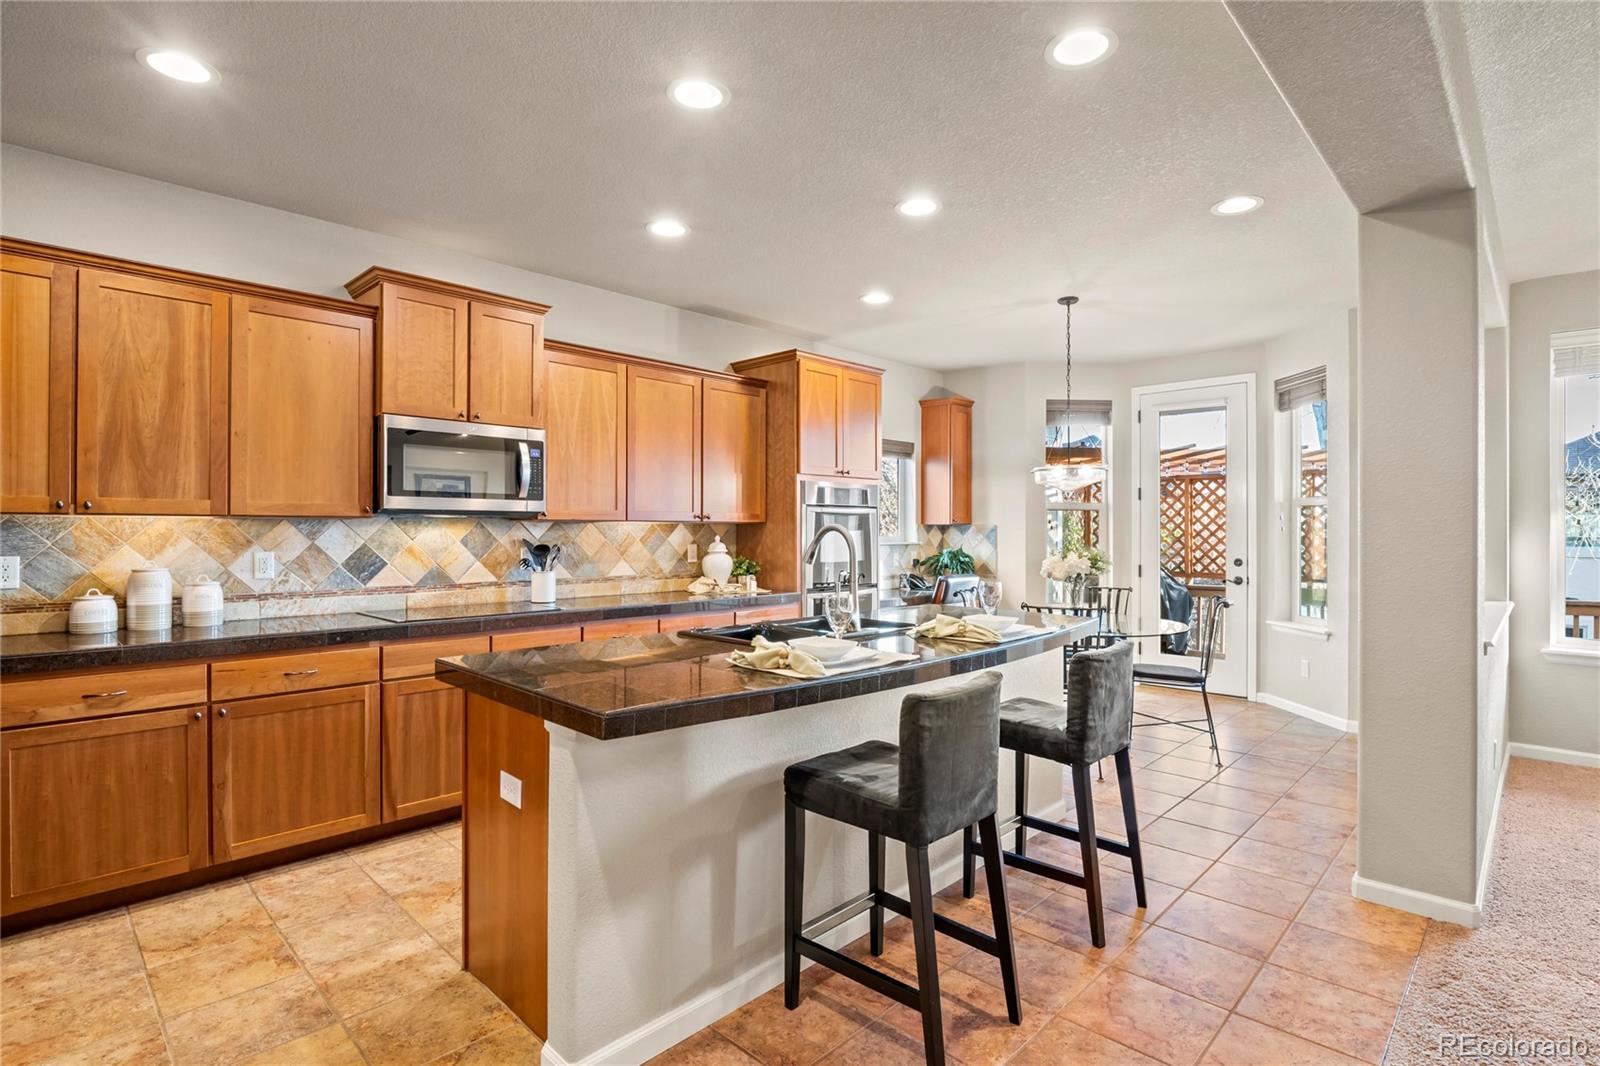 9796 71st, Arvada, CO